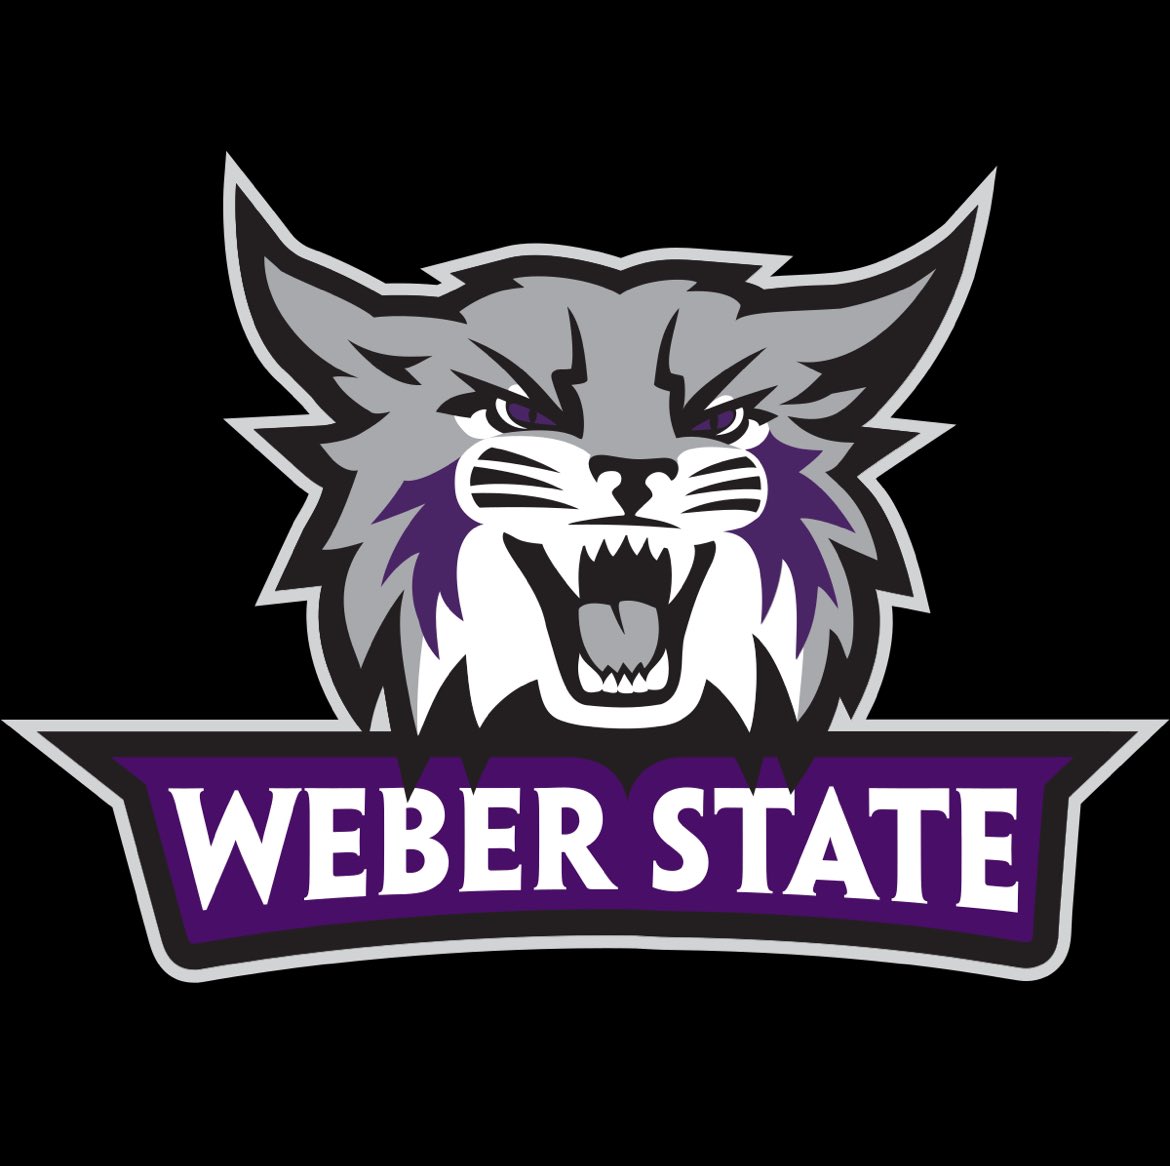 Thank you to @d_fiefia From @weberstatefb for stopping by Folsom today. We appreciate you! #GoBullDogs
@CoachTravisFHS @coach_angel3 @CoachIrsik1